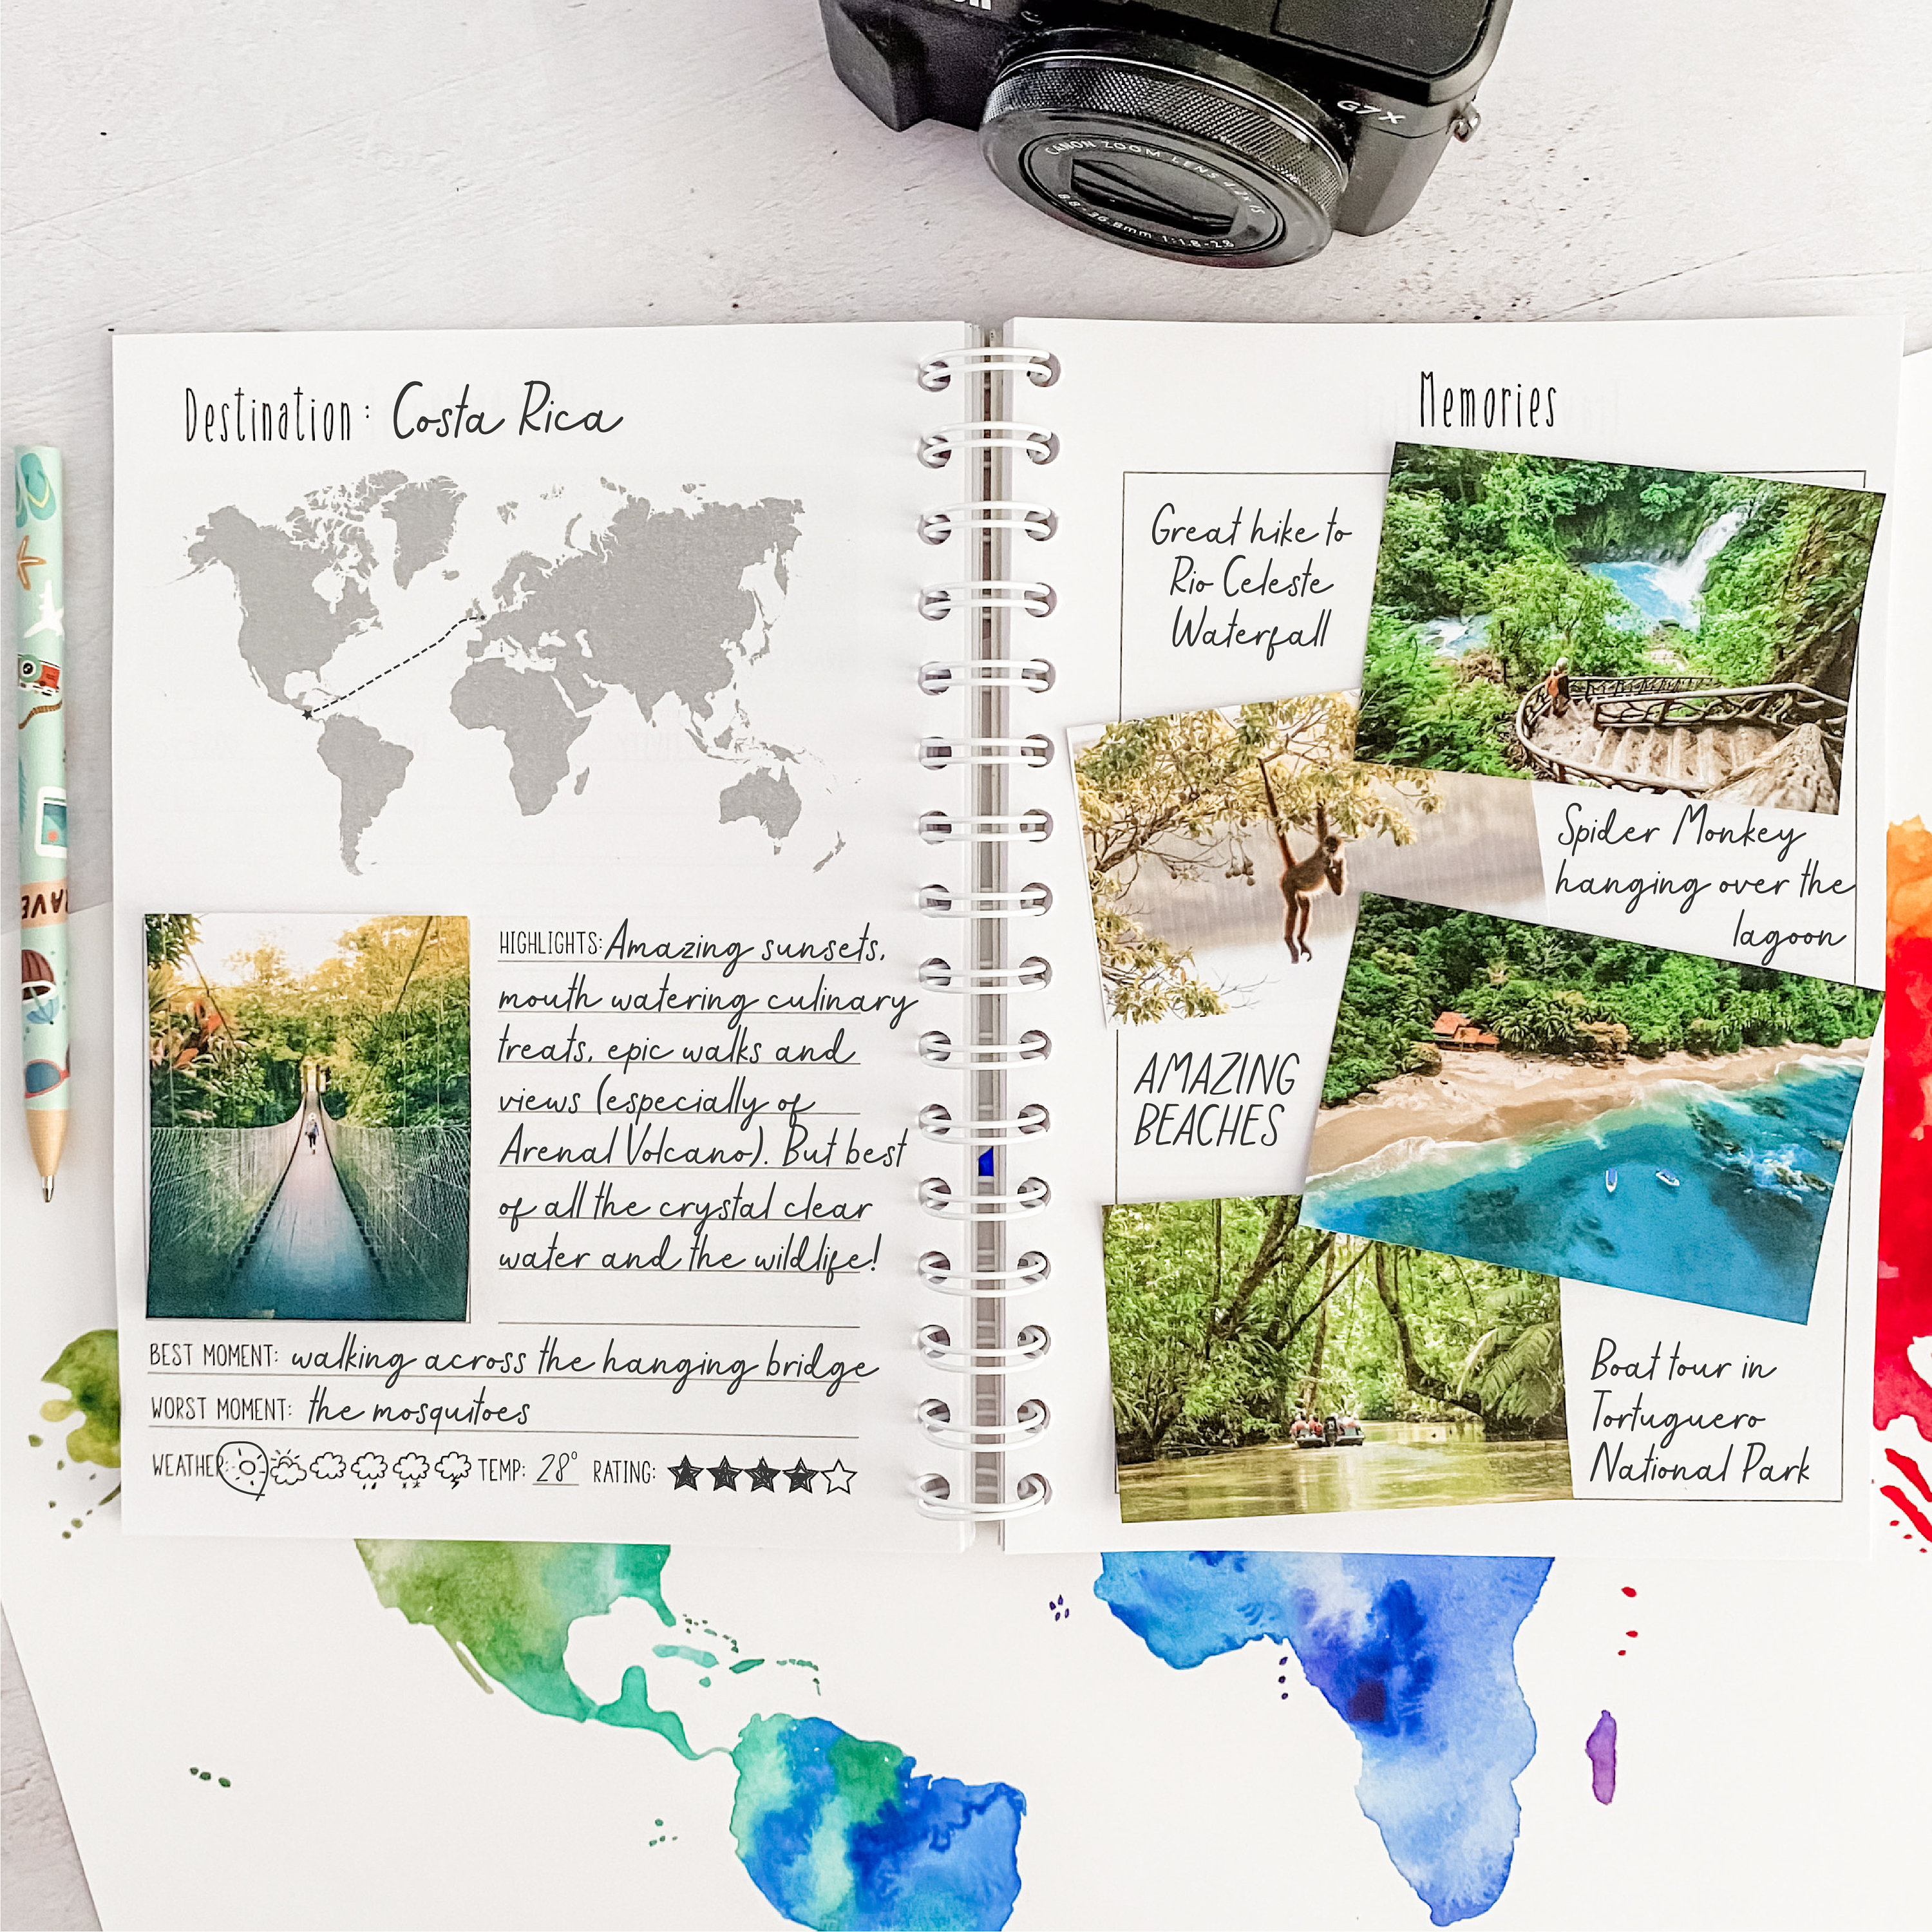 Travel Journal | 50 Scratch-Off Travel Activities | Perfect Gift for Travelers | The Adventure Challenge - Travel Edition